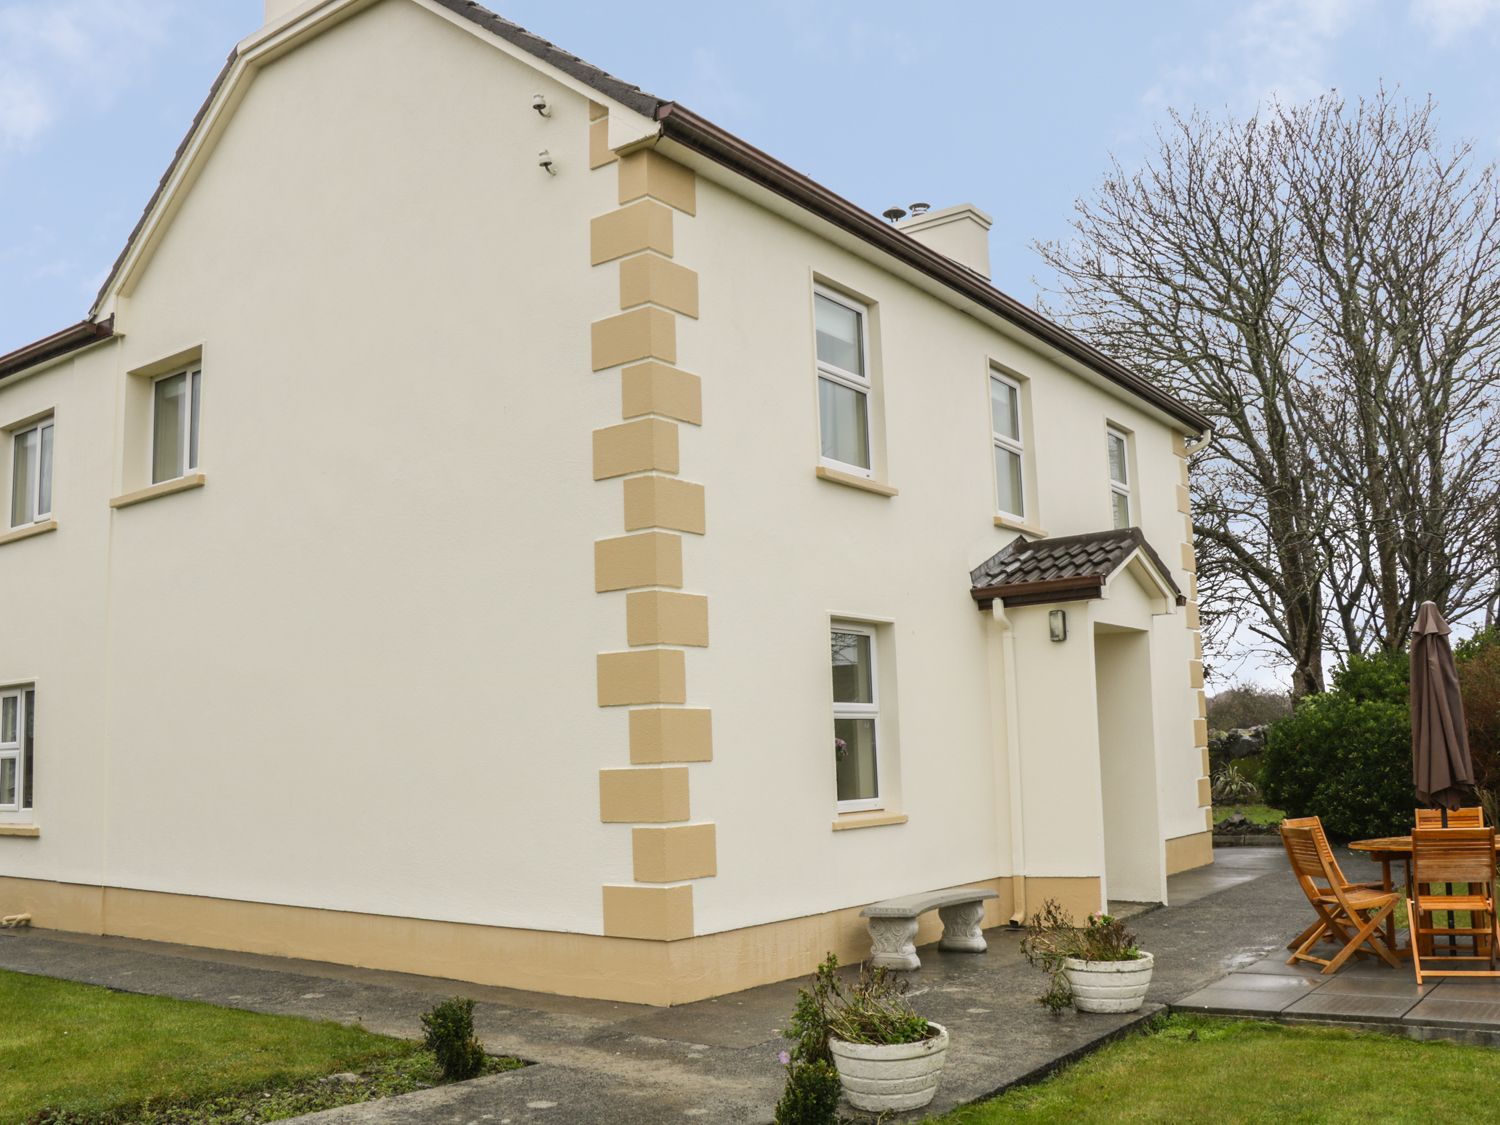 Tigh Darby - Shancroagh & County Galway - 906470 - photo 1